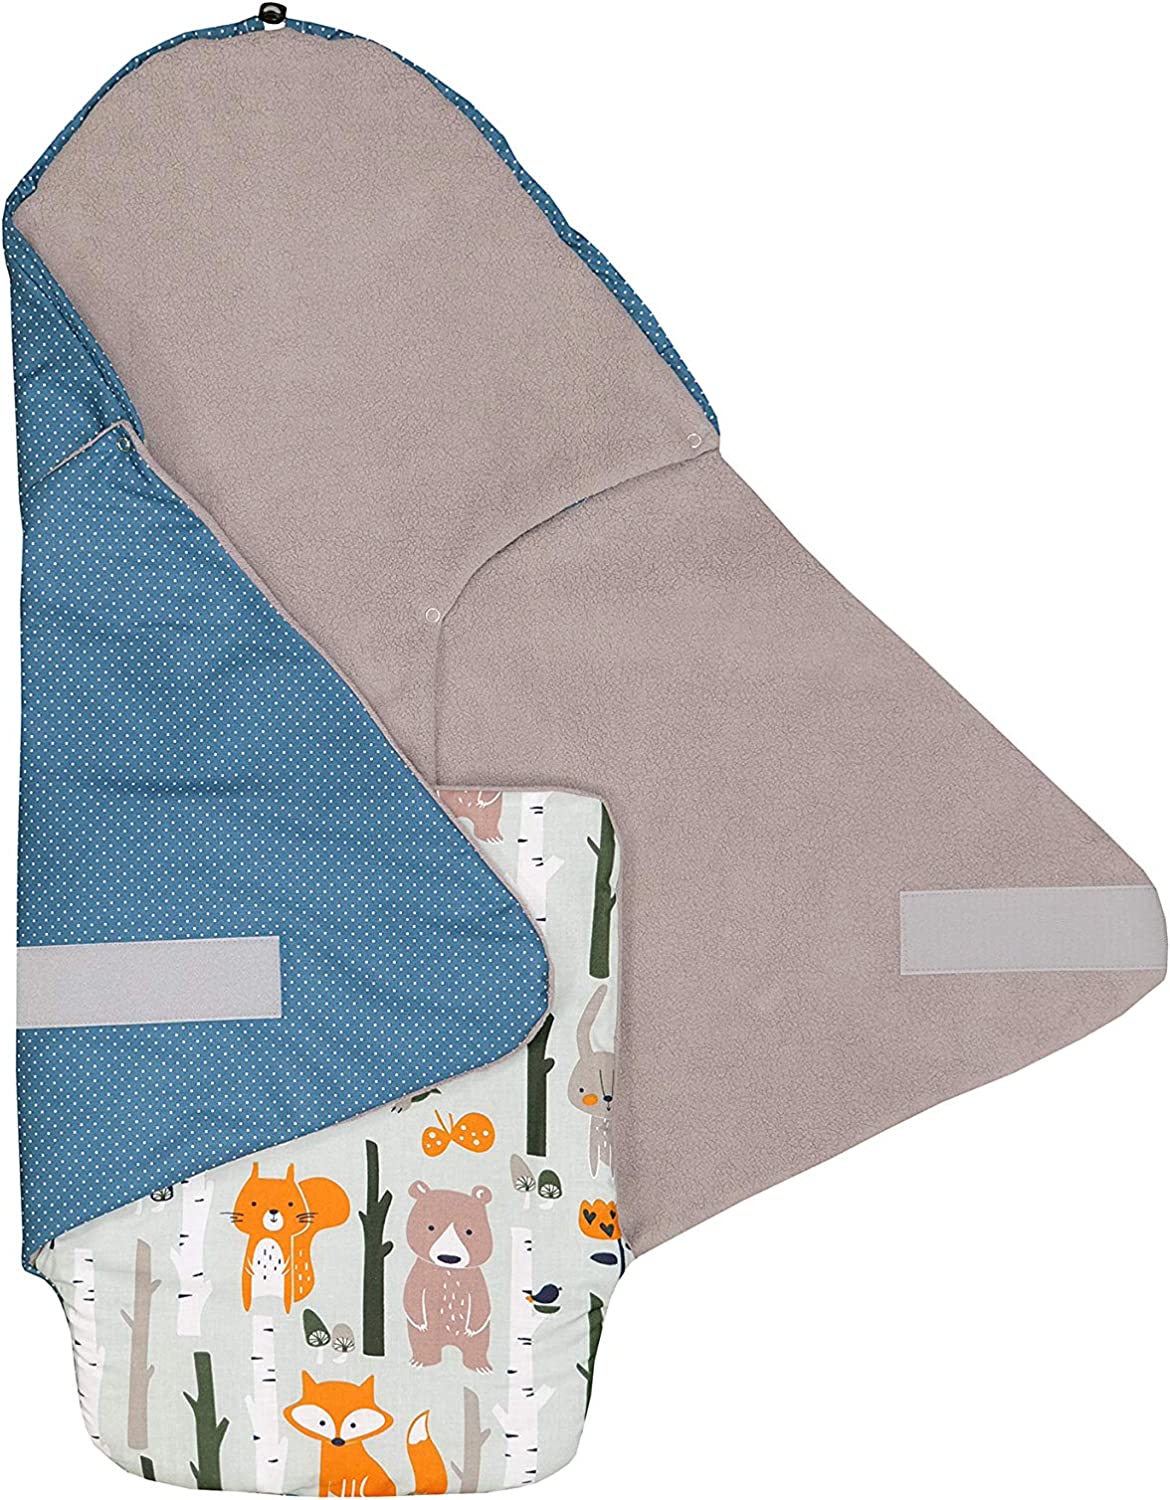 ULLENBOOM ® Swaddling Blanket Baby Seat Forest Animals Petrol (Made in EU) - Baby Blanket for Car Seat (e.g. Maxi Cosi®), baby bath or pram, ideal blanket for babies (0 to 9 months)